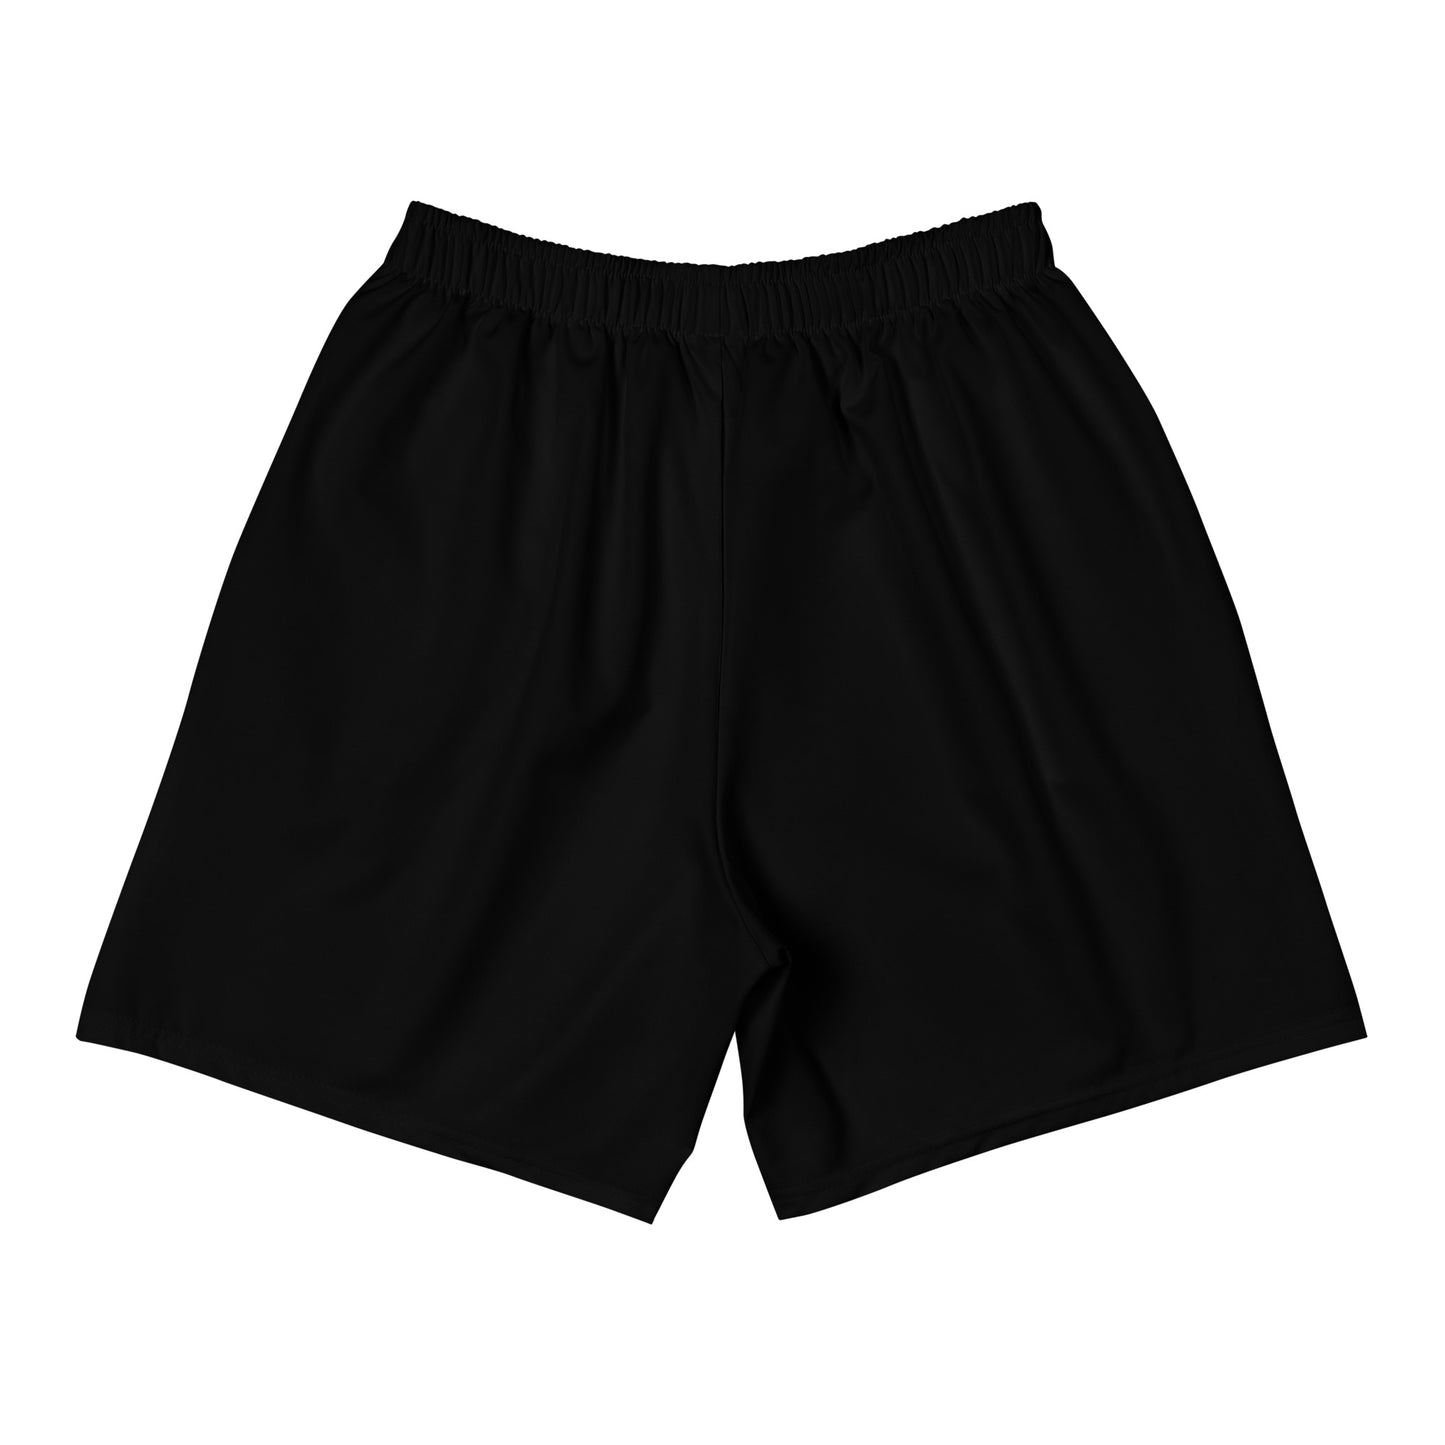 Perfectly Imperfect Athletic Shorts